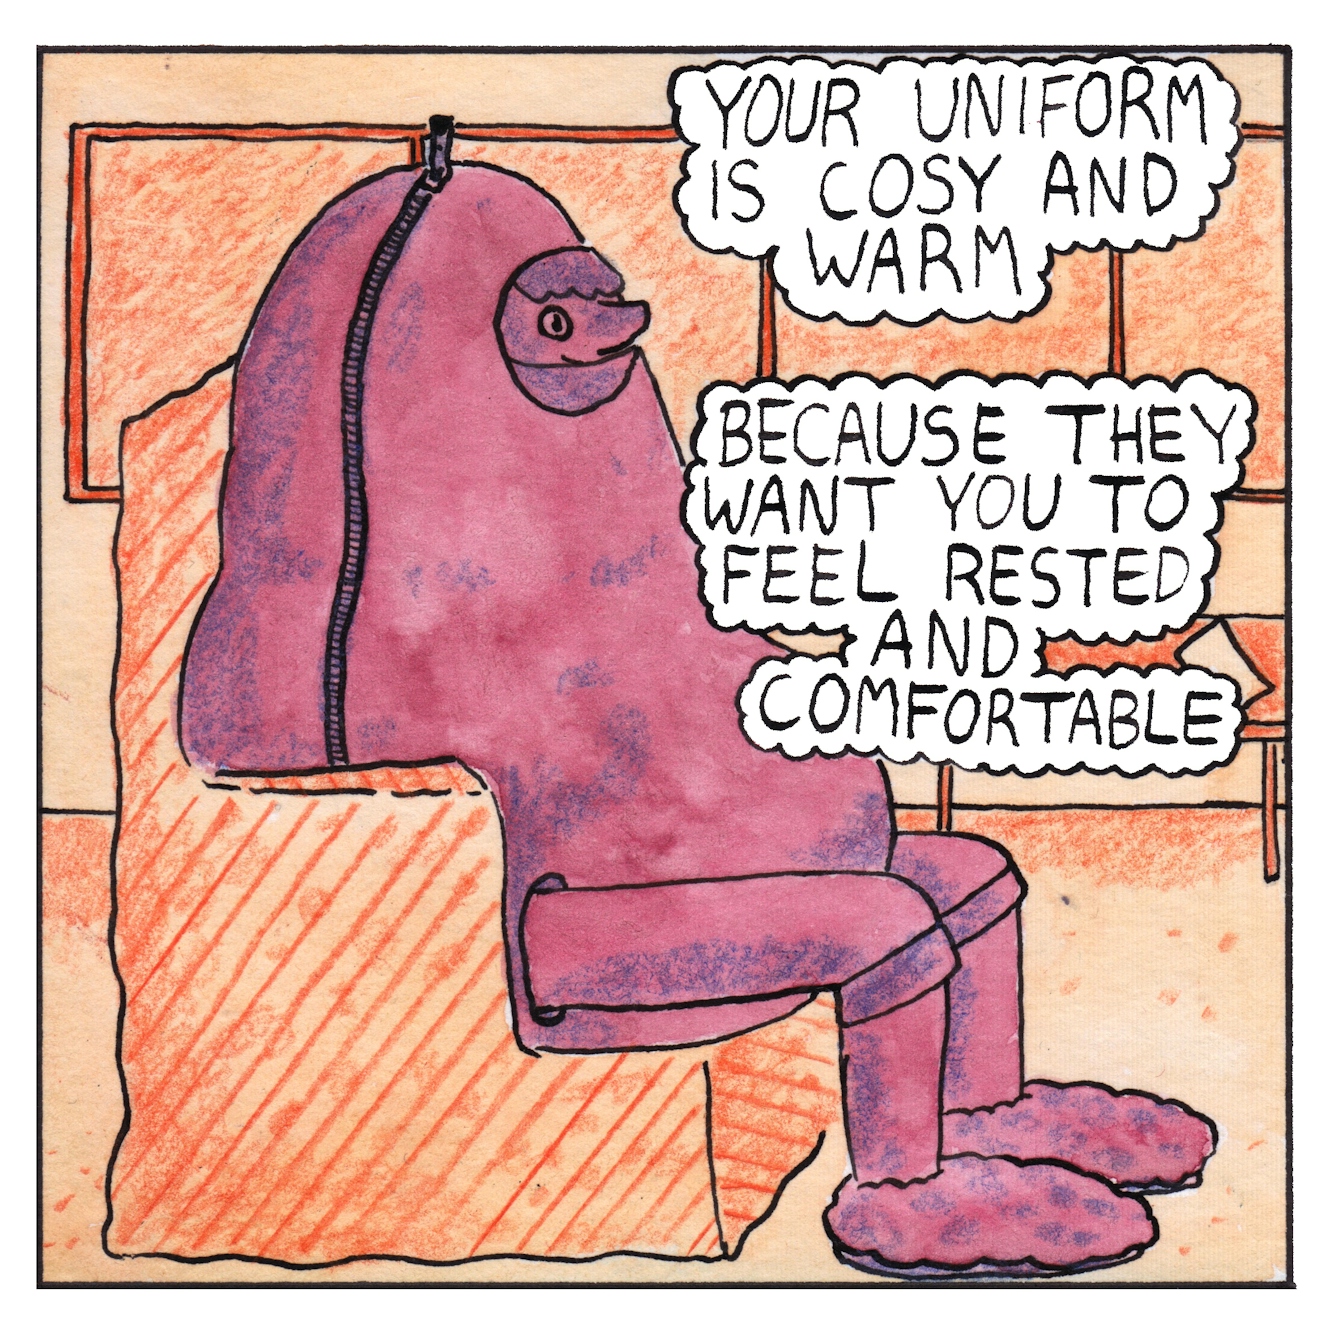 Panel 2 of a six-panel comic drawn with ink, watercolour and colour pencils:  A purple person engulfed in what seems to be a bulky sleeping bag with leg-holes. They look like a large squishy aubergine. Their eyes and nose poking out of a small hole. they have long socks and fluffy slippers on. They are sitting on a soft orange armchair. In the background there are screens and a table. Two bubbles of text read: "Your uniform is cosy and warm, because they want you to feel rested and comfortable"